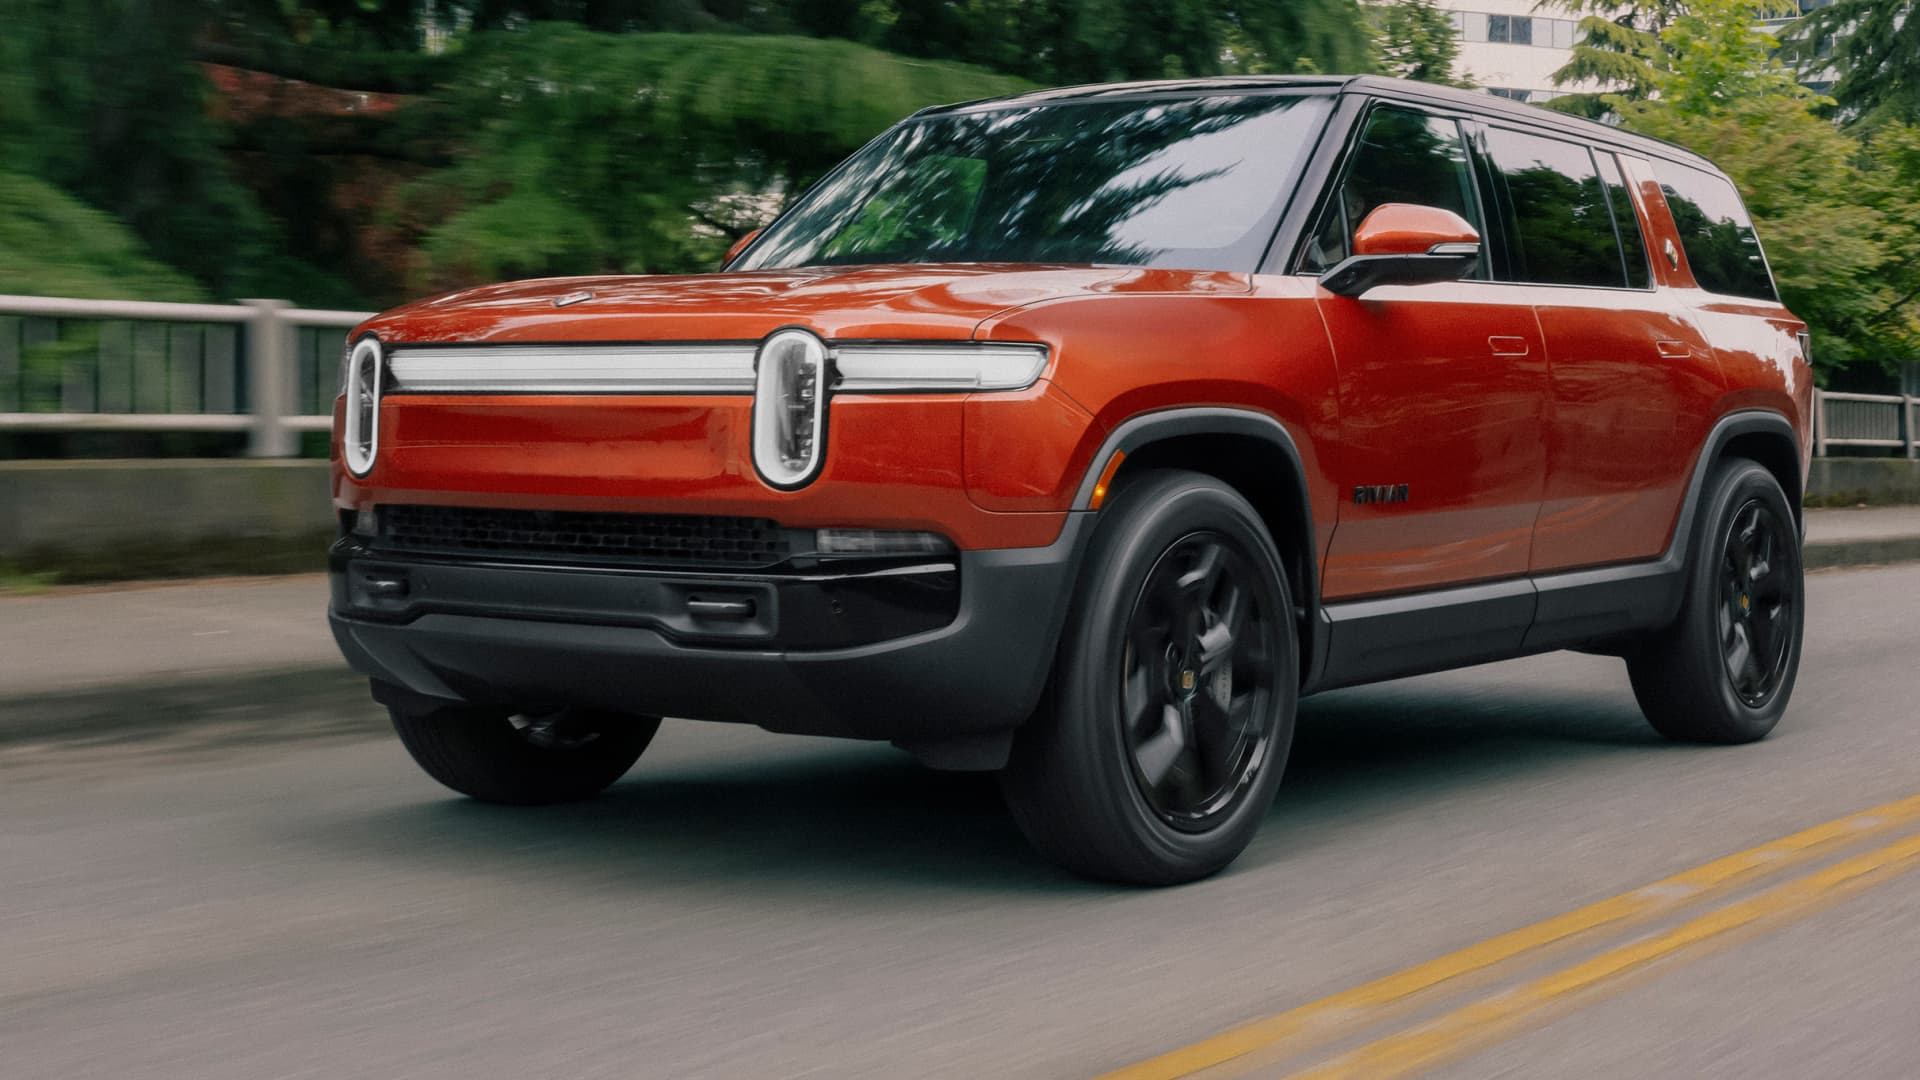 Rivian Investor Day focuses on cost reduction and efficiency improvements